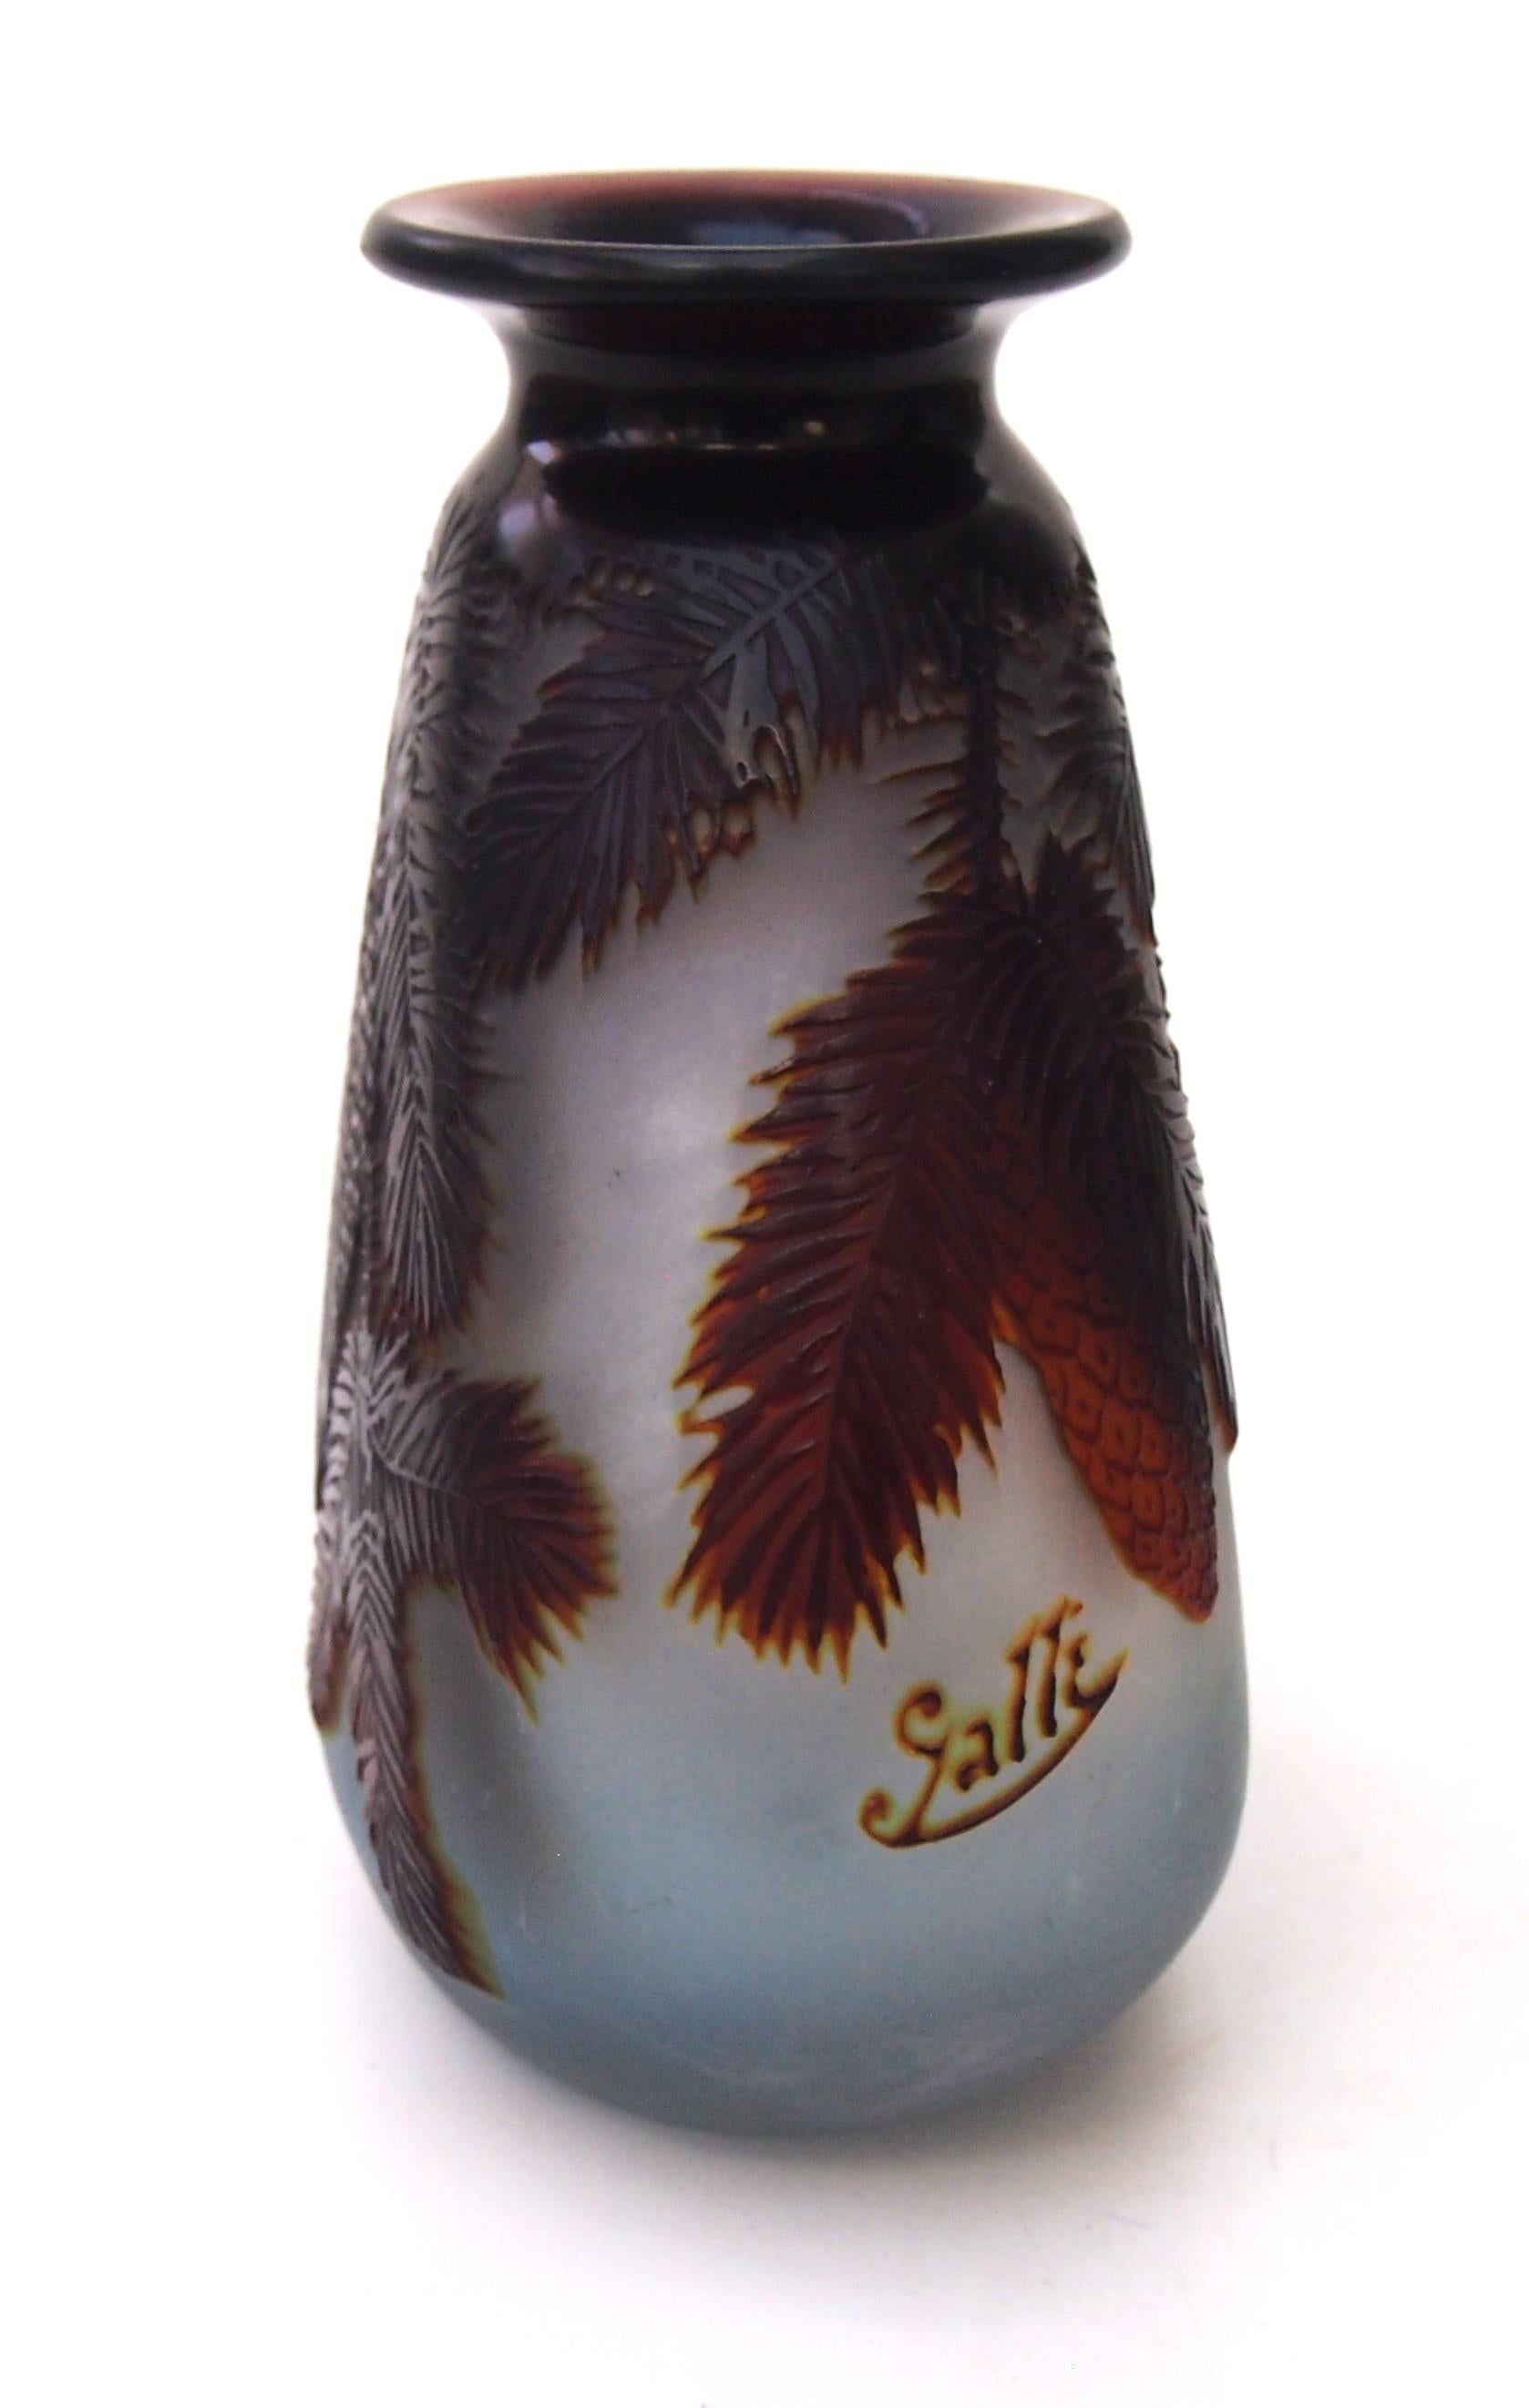 Fabulous Emile Galle deeply cut cameo vase in an unusual almost triangular form, with a wide flared opened mouth. Coloured in deep browns and mid browns over pale blue. It is decorated with spectacular fir cones and spiny tree branches. Possibly one